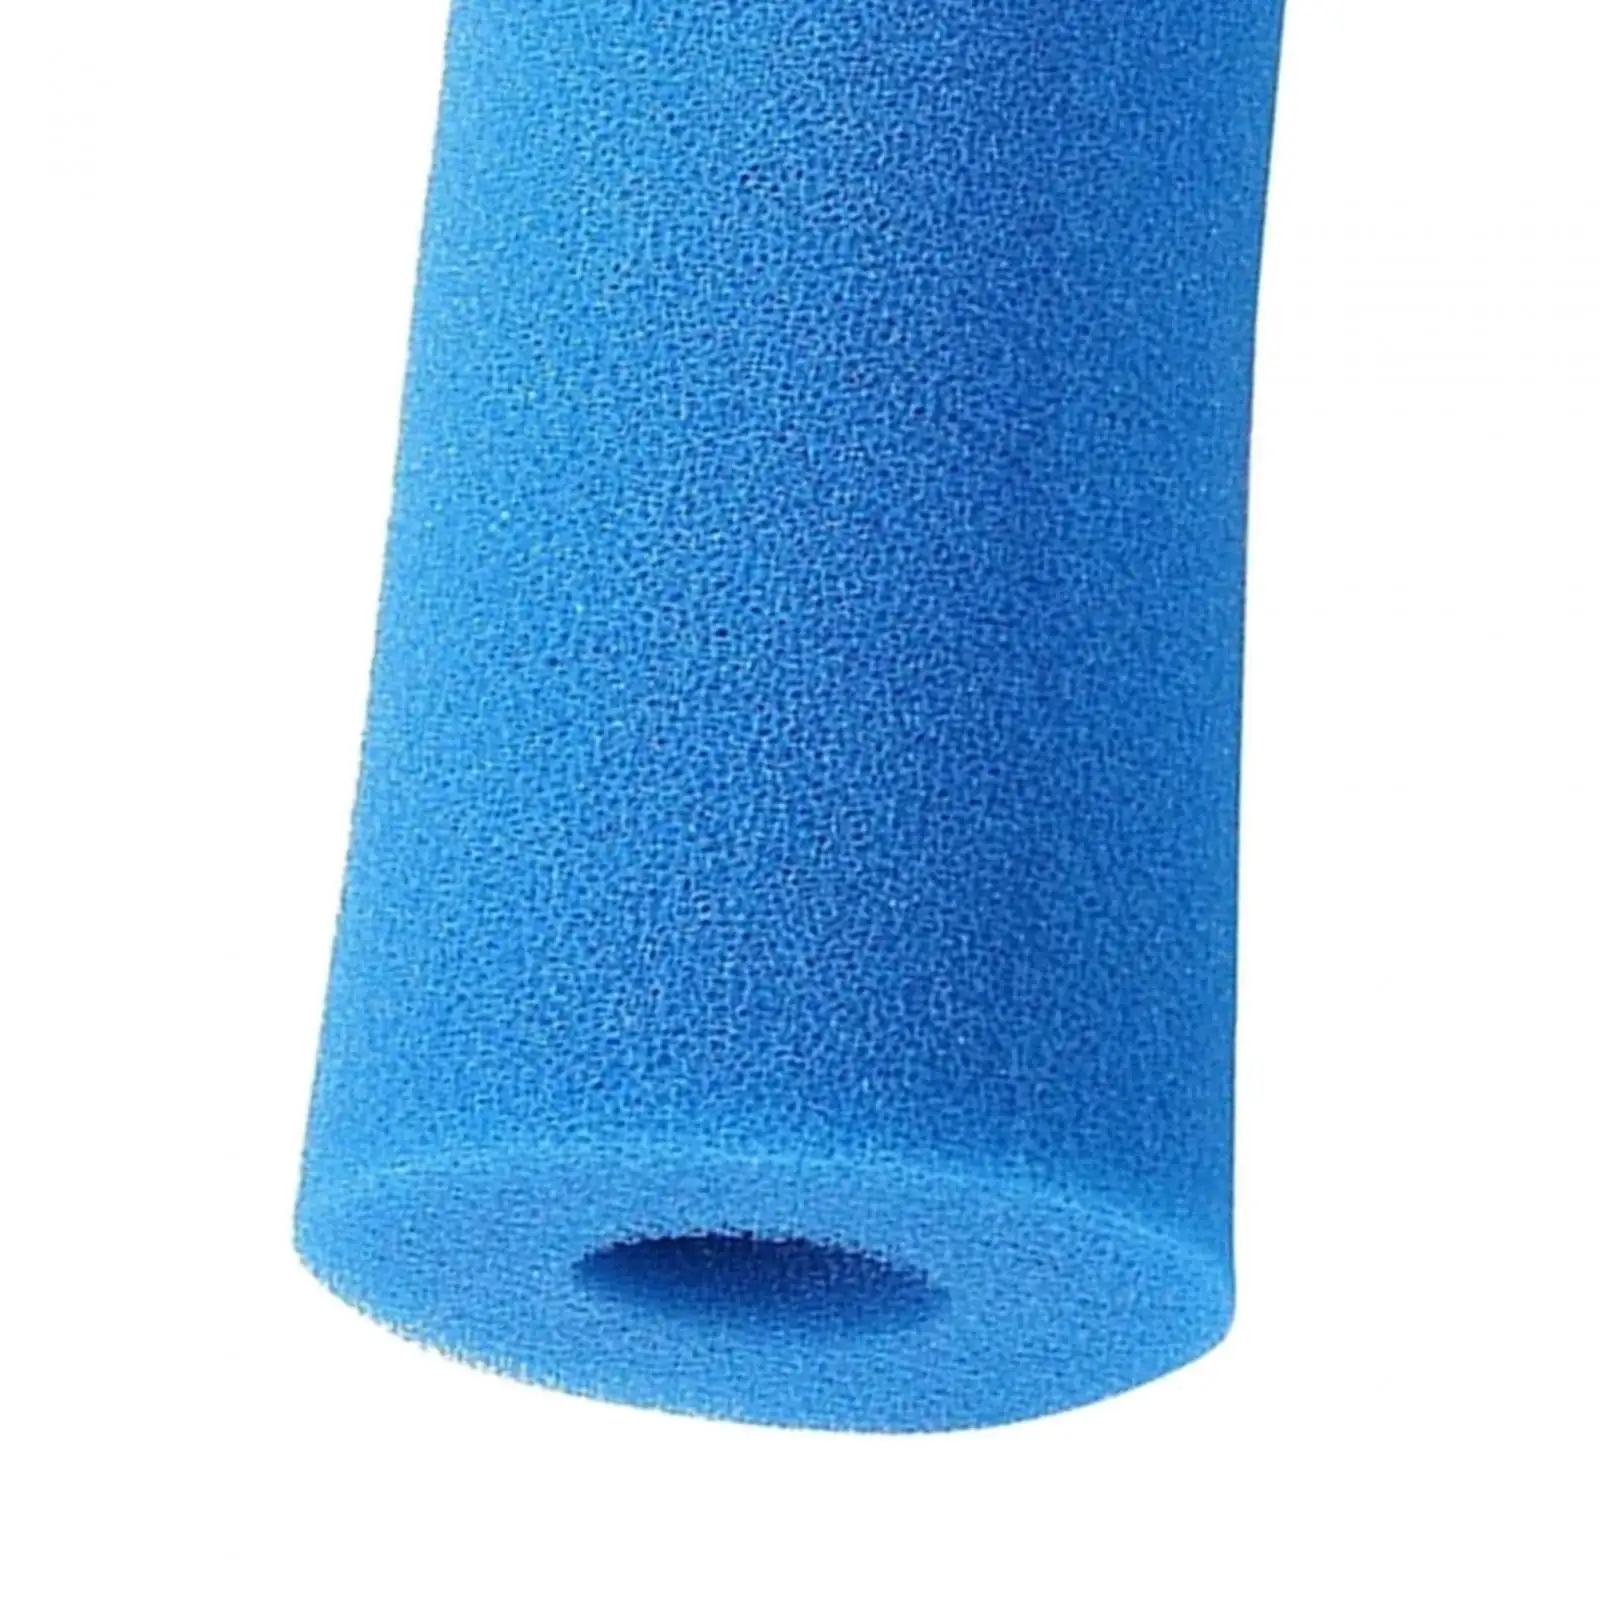 Pool Filter Cartridge Filter Pump Cartridge Washable Professional Easy to Clean Durable Replace Pool Sponge Filter for Type B